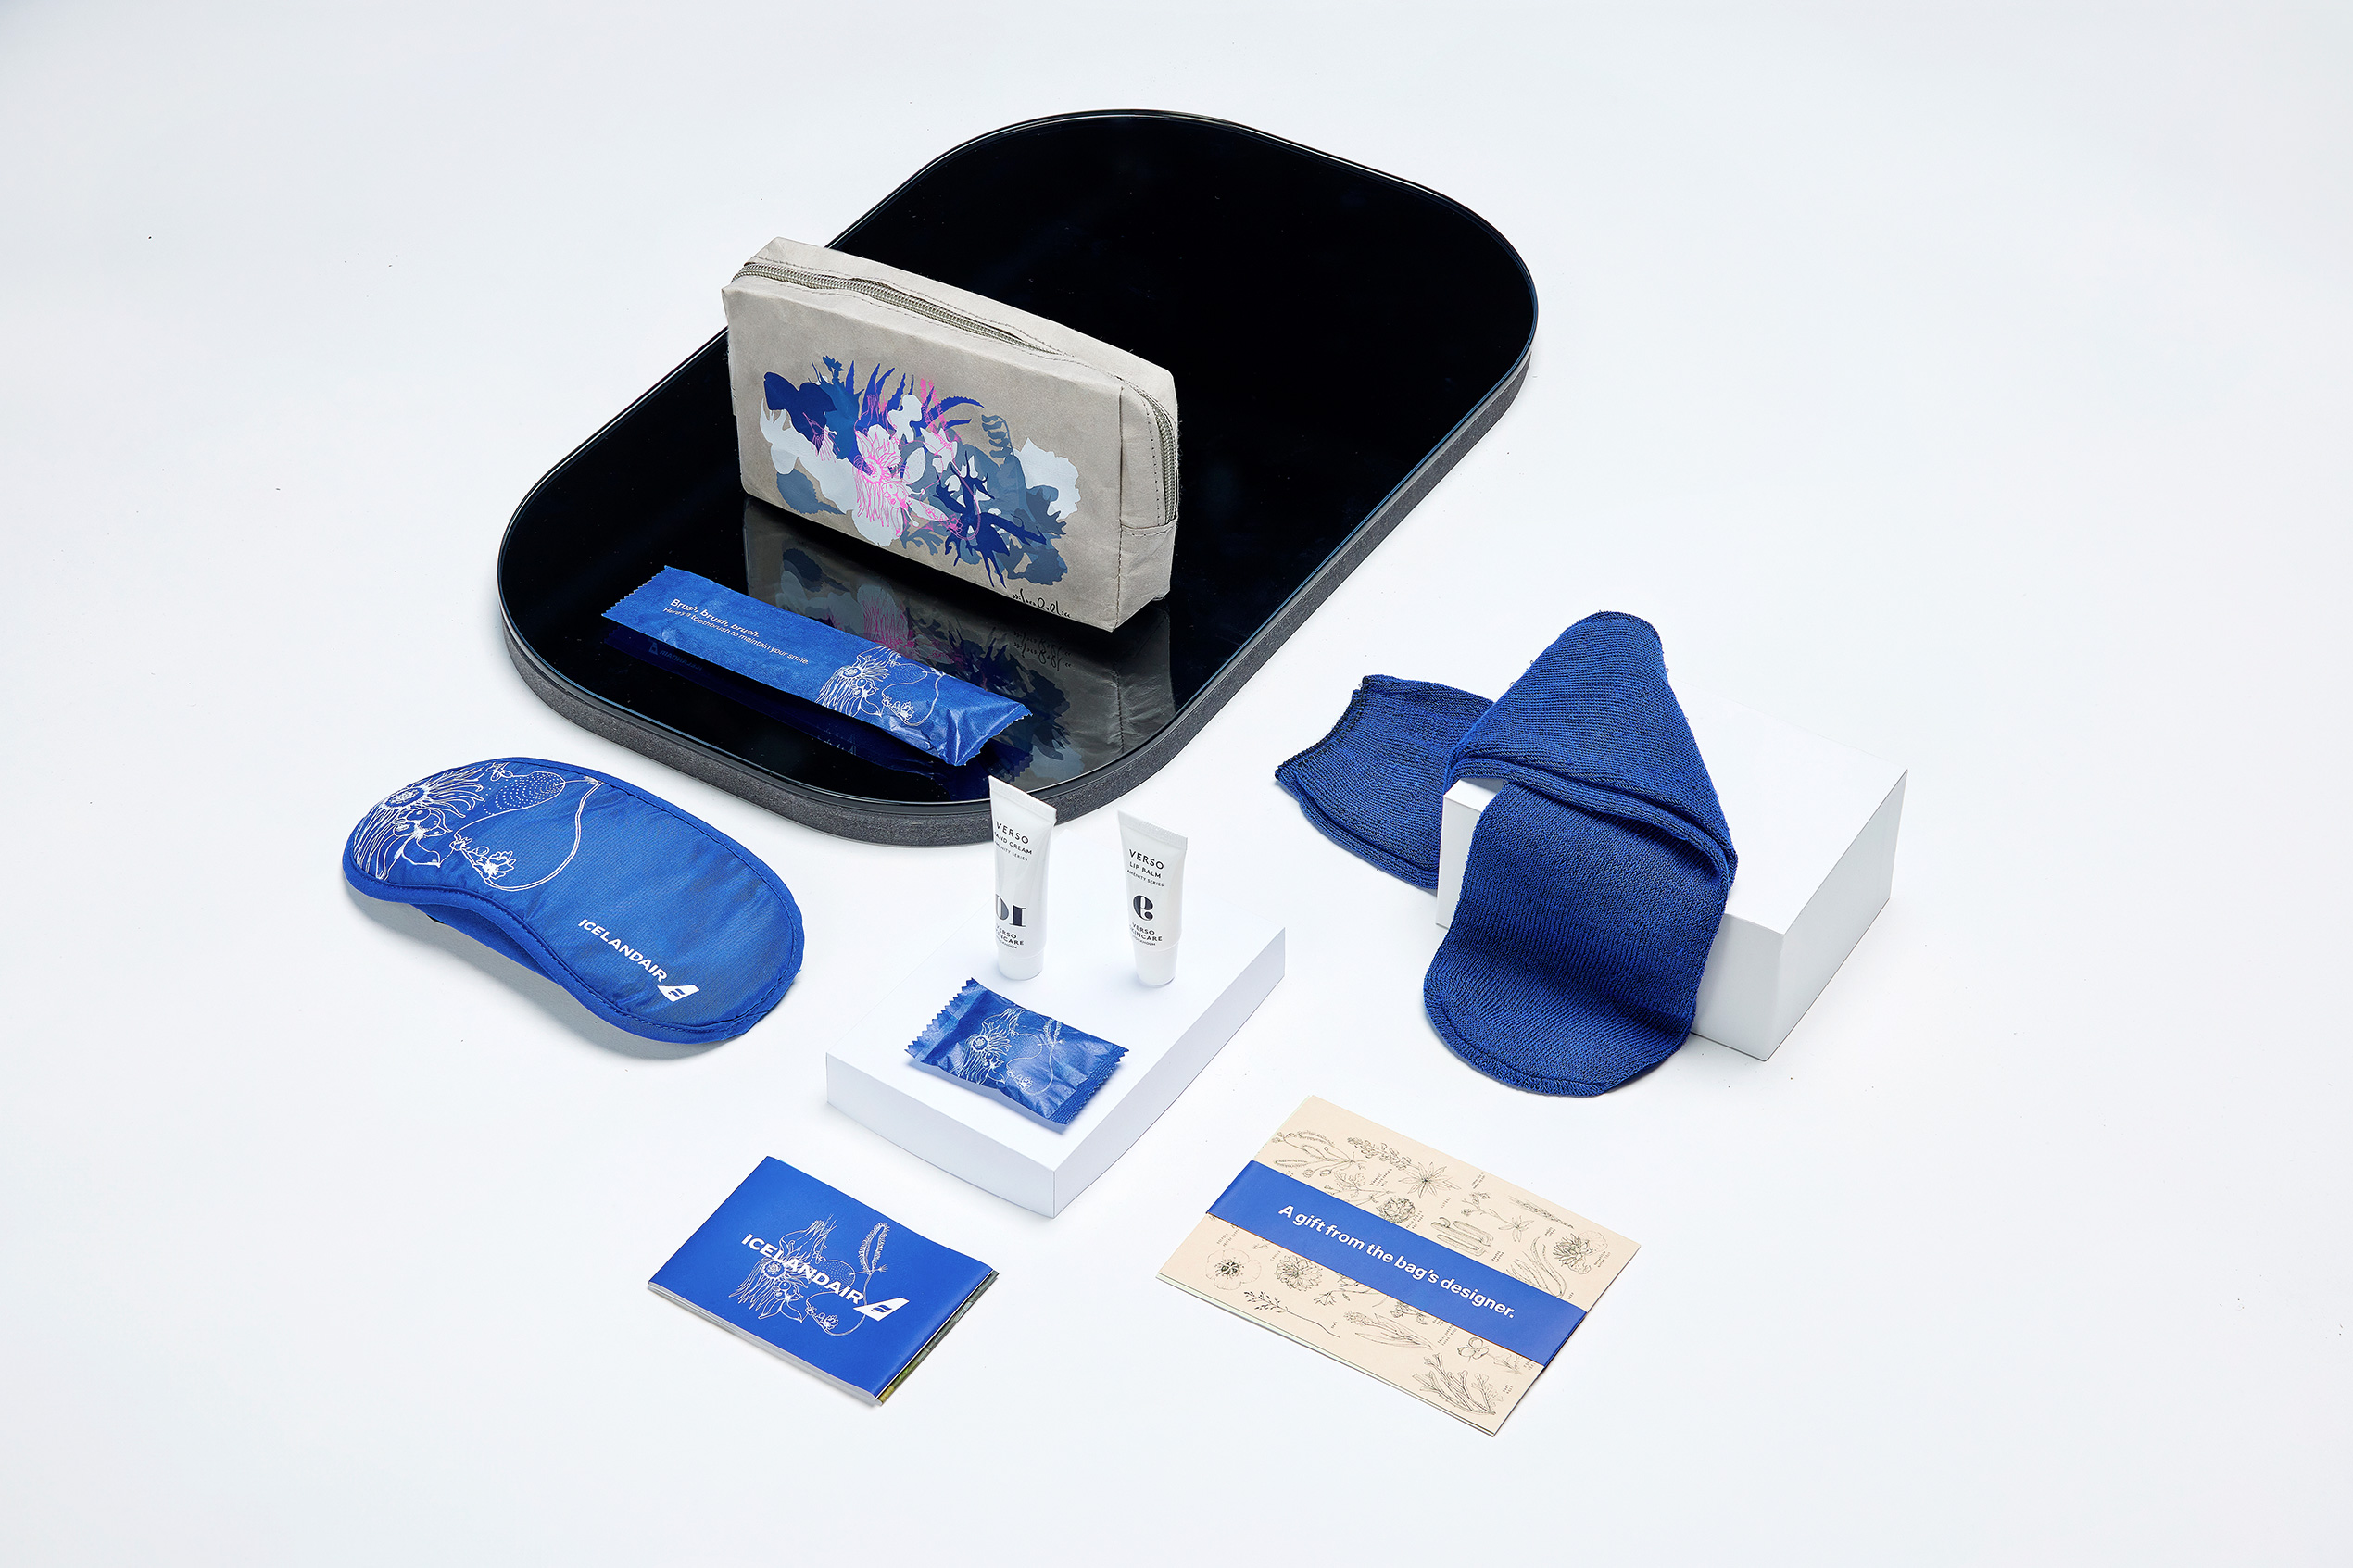 Icelandair's Flora amenity kit and contents, including kit bag, socks, eye mask, and skincare items